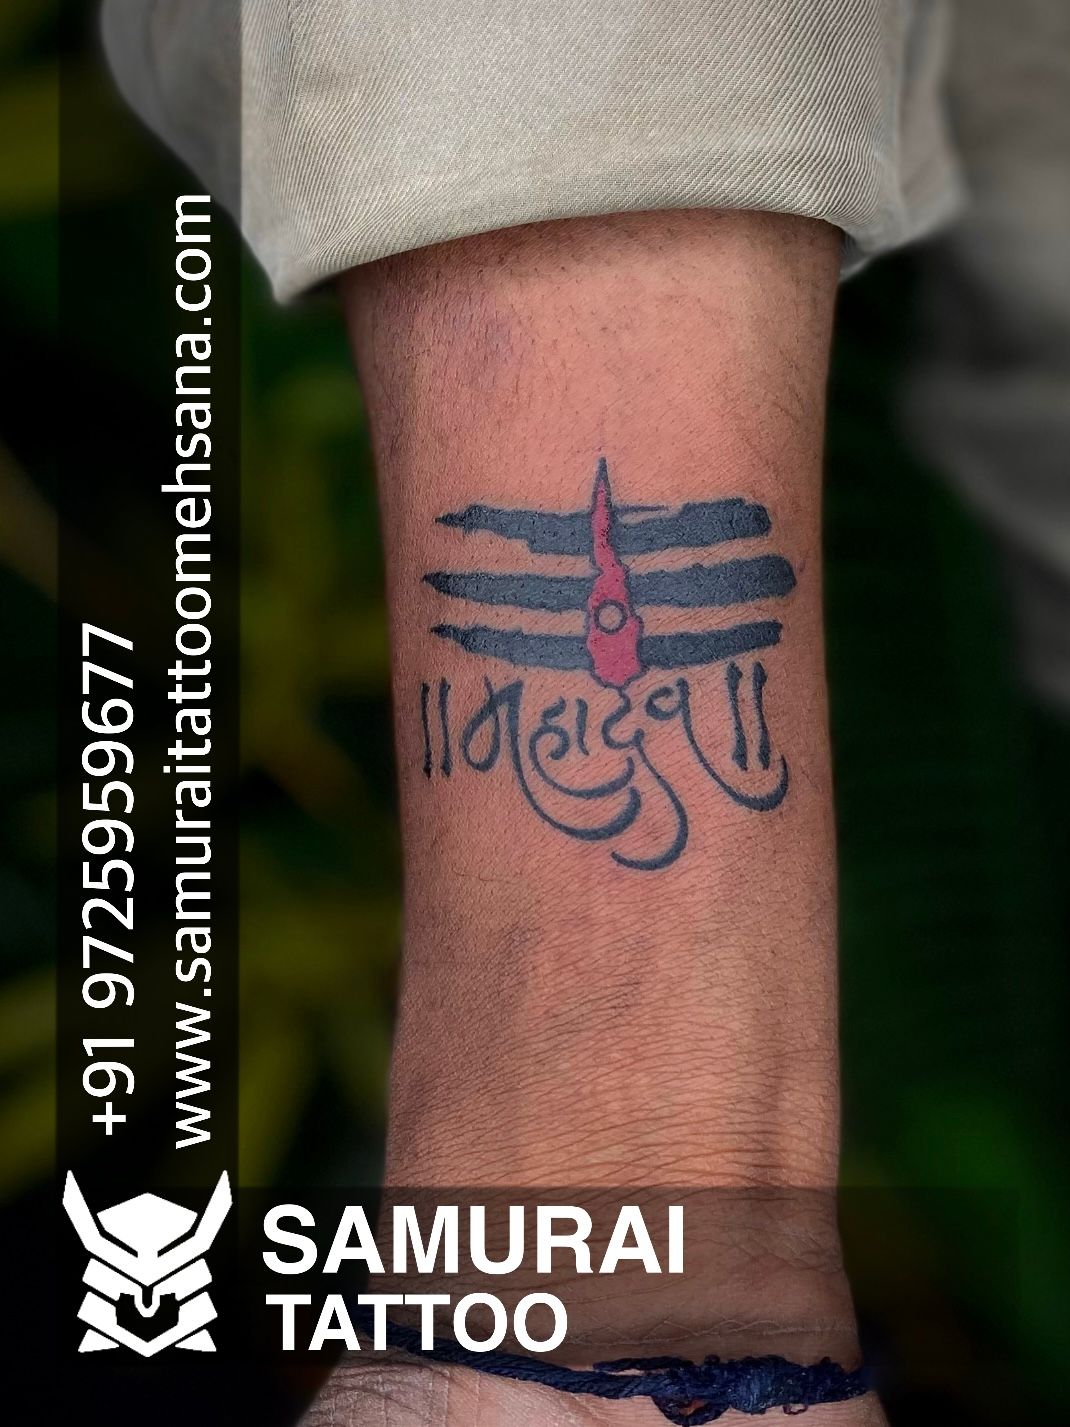 31 Trishul Tattoo Designs For Men And Women With Meanings